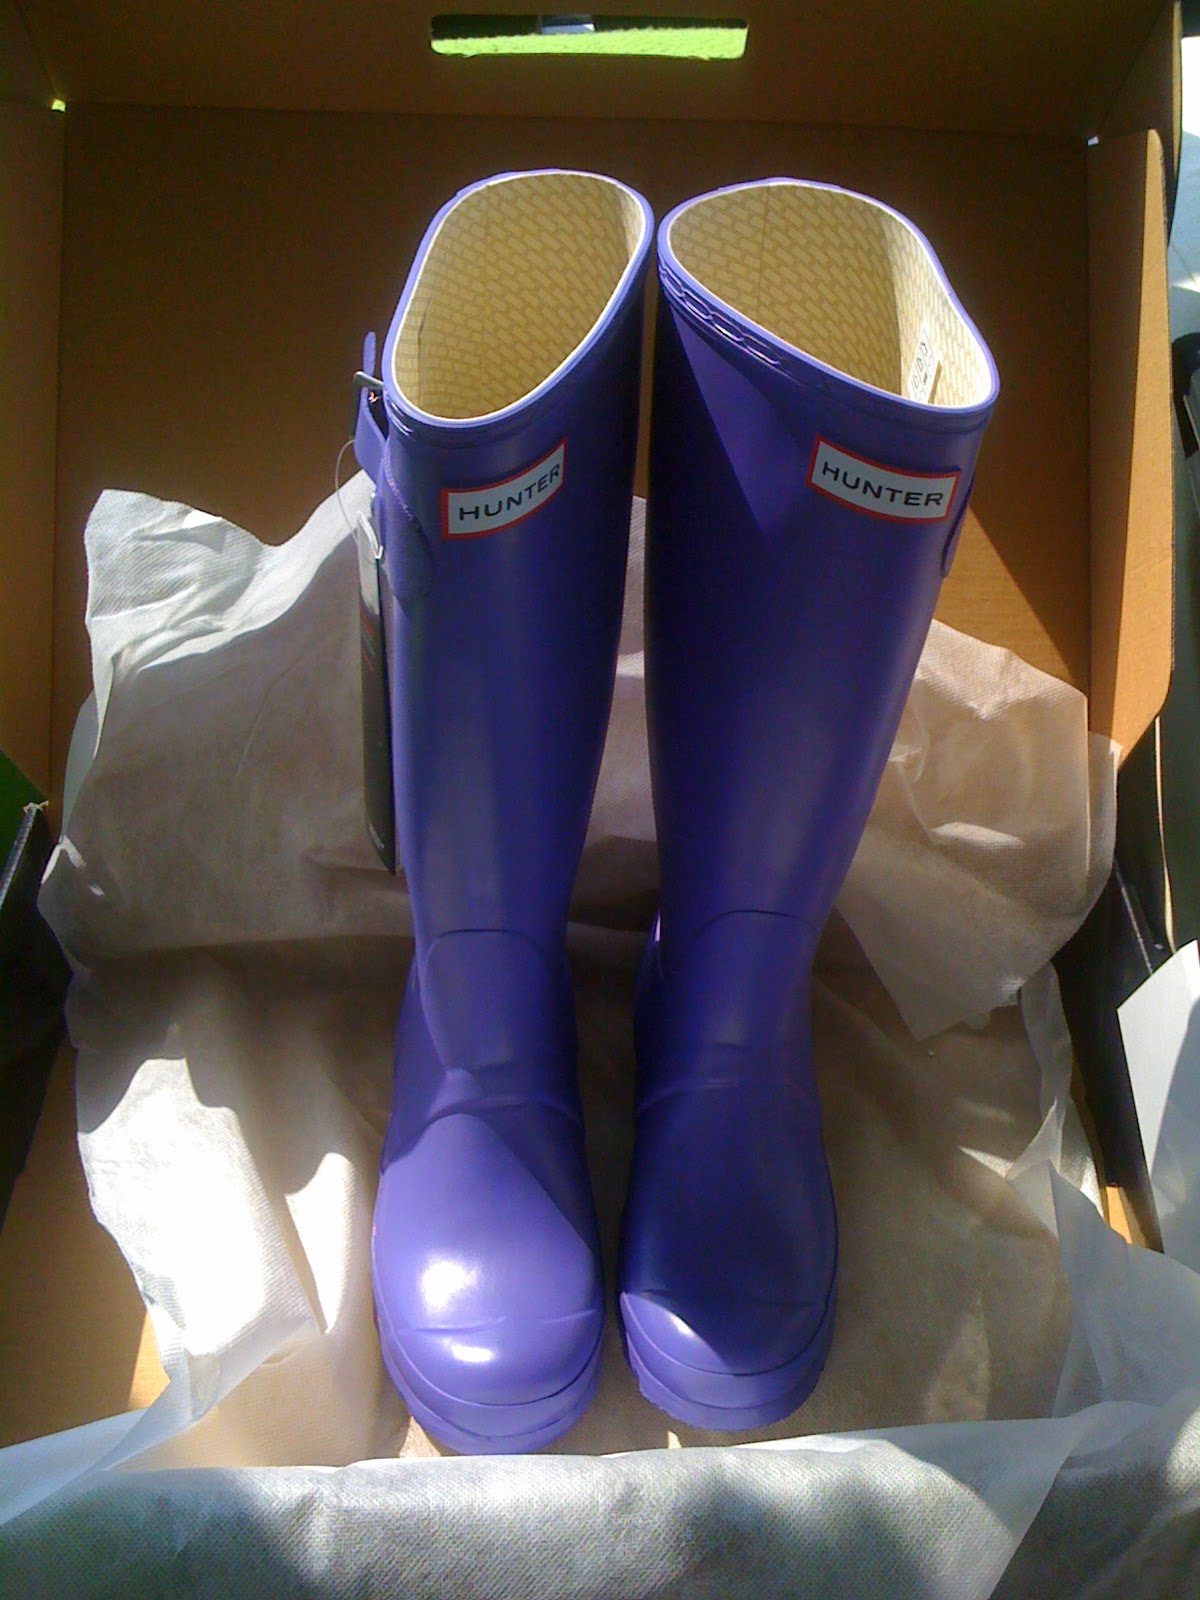 The wind and the wellies: The distraction of the posh purple wellies